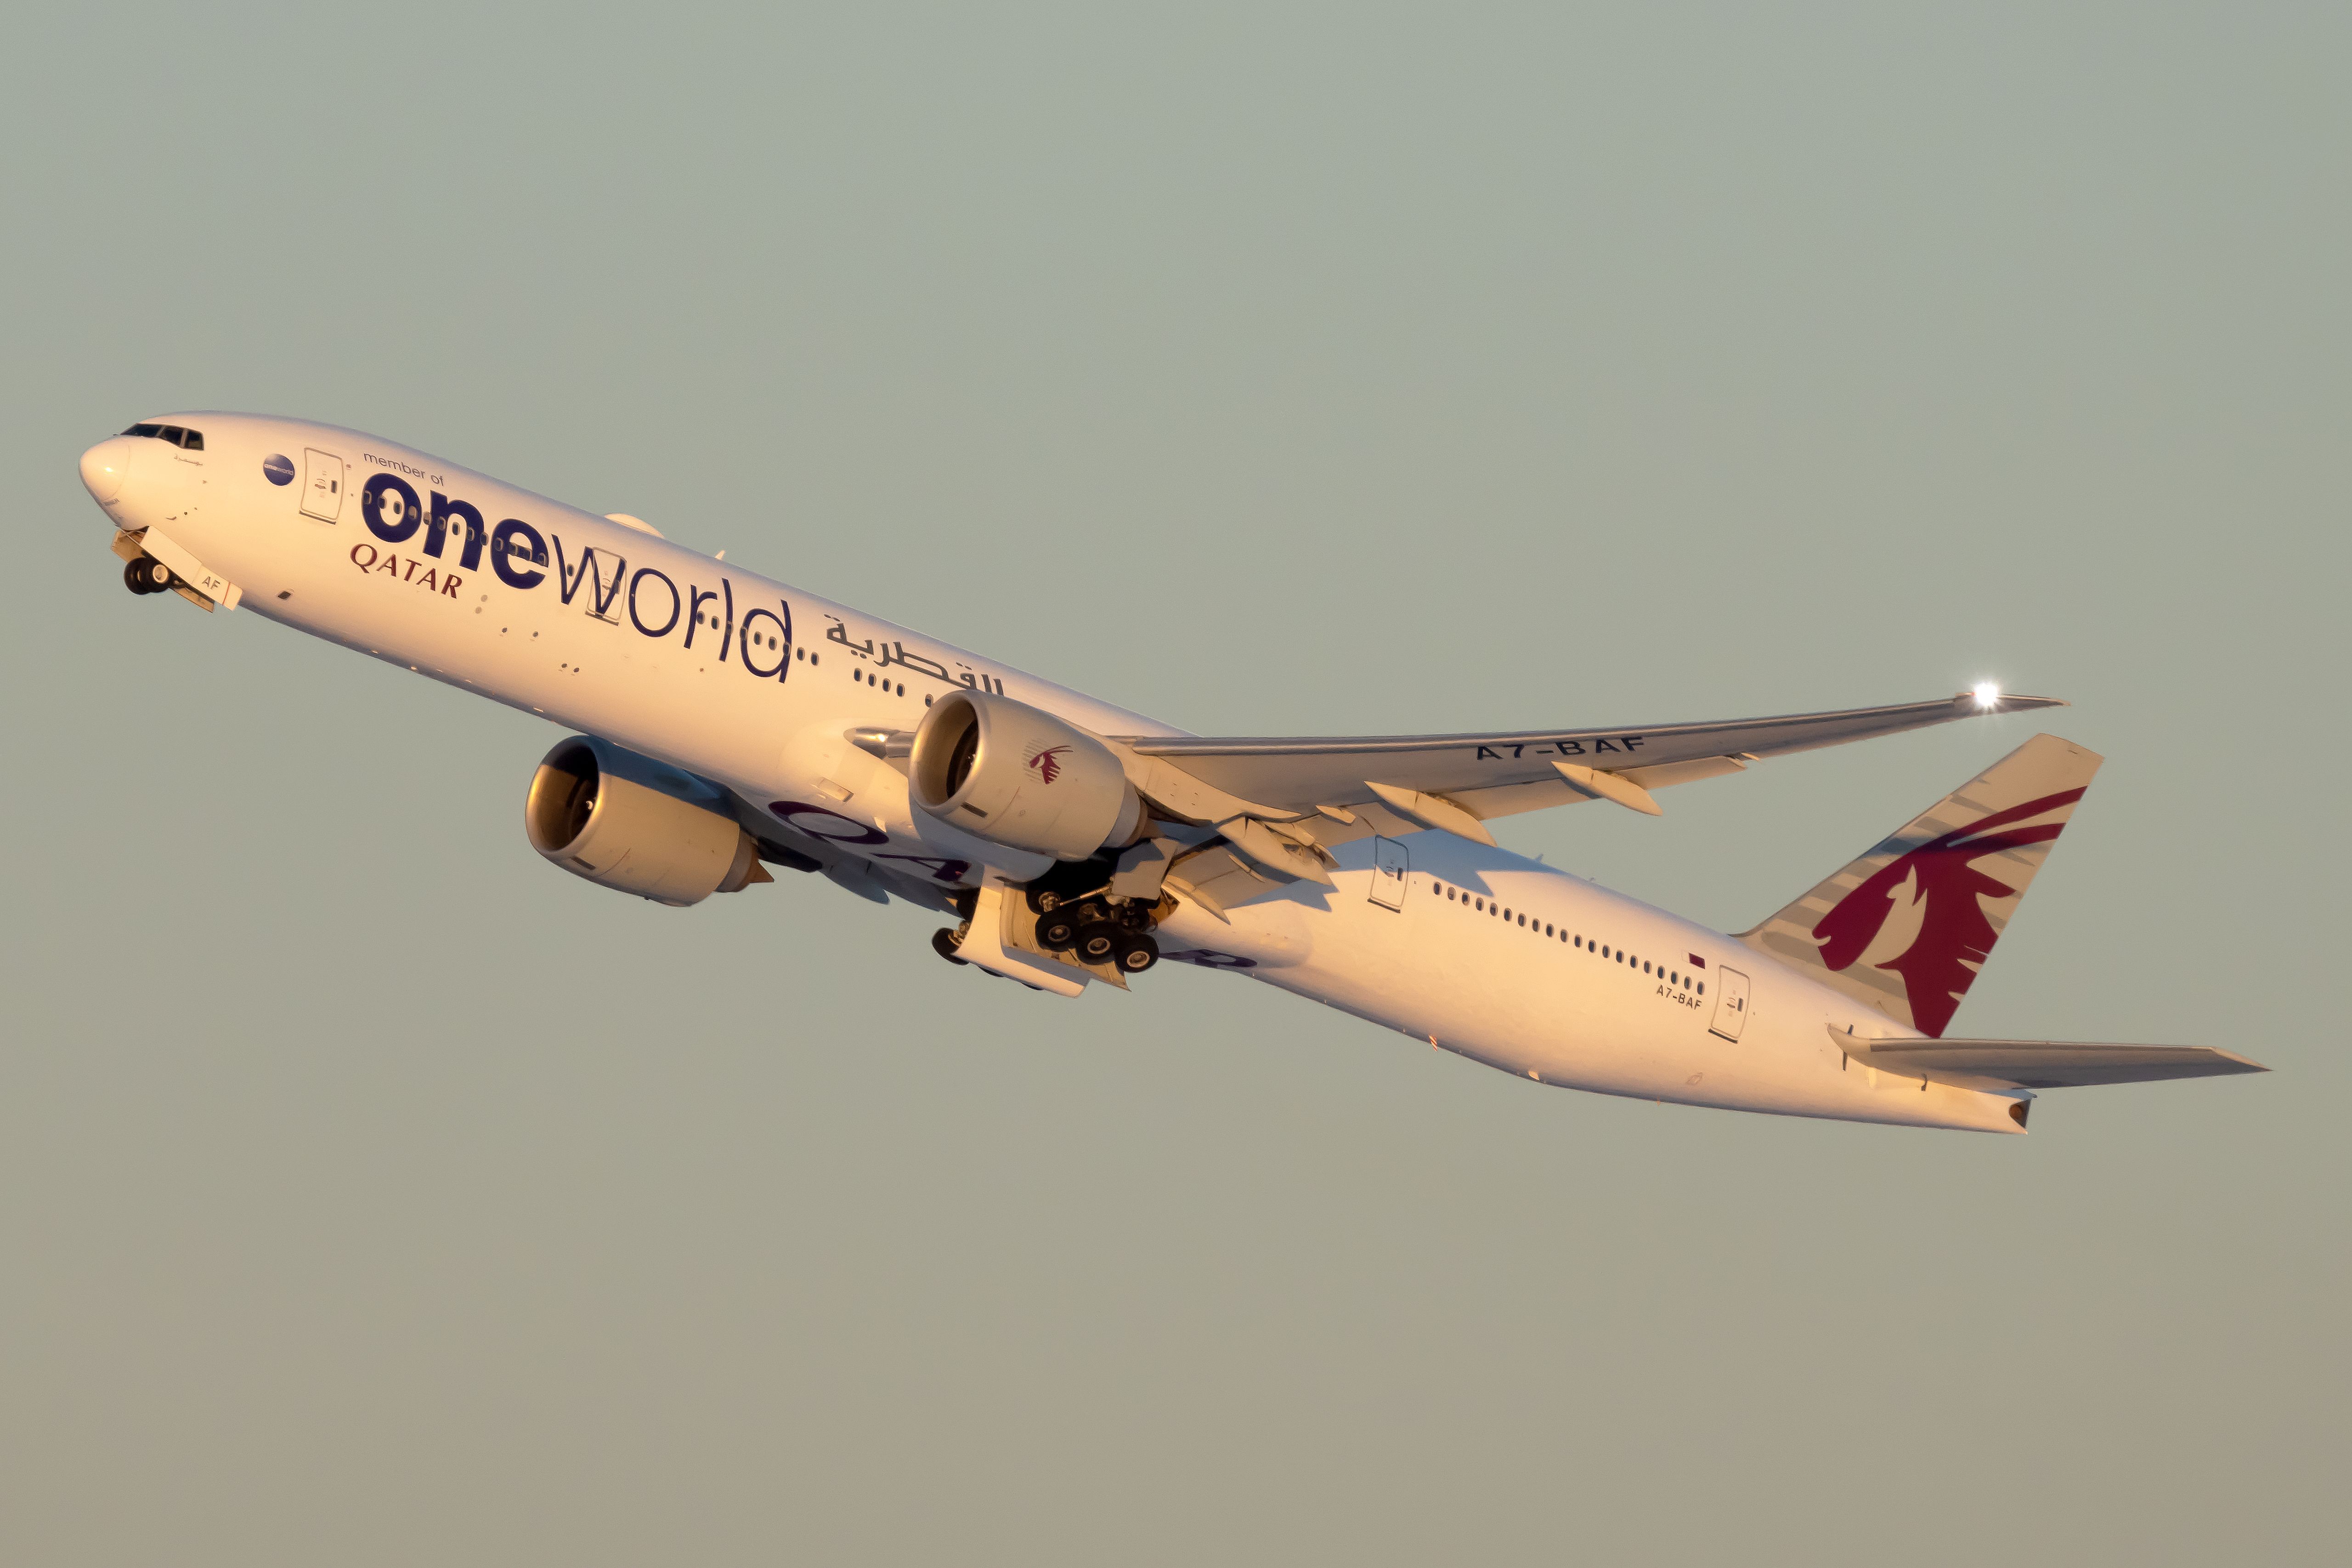 A Qatar Airways Boeing 777 in OneWorld Livery flying in the sky.